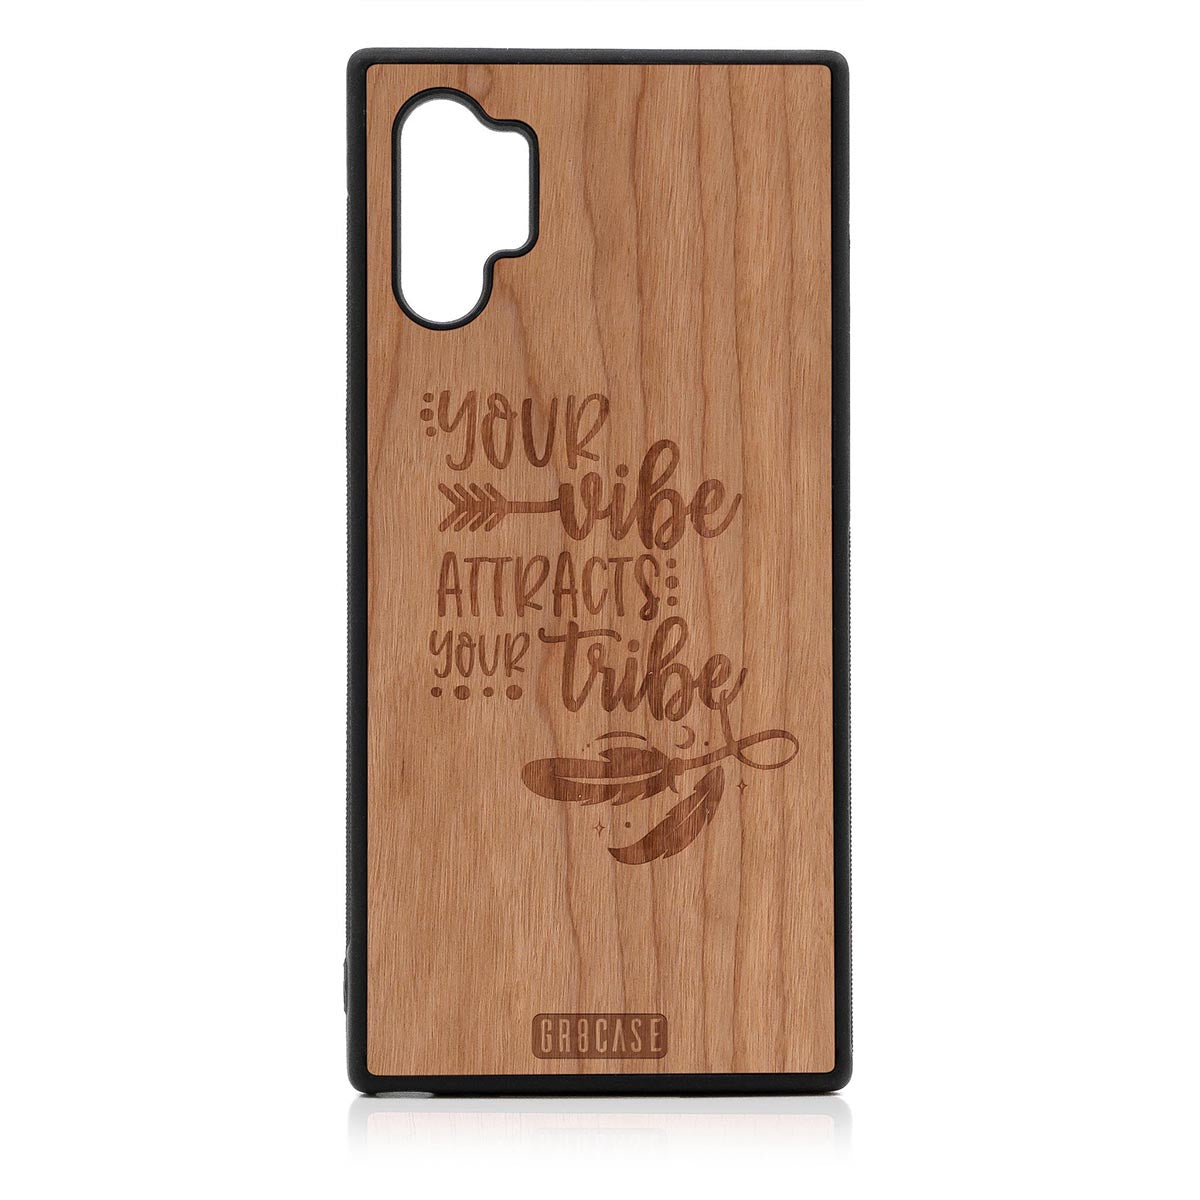 Your Vibe Attracts Your Tribe Design Wood Case Samsung Galaxy Note 10 Plus